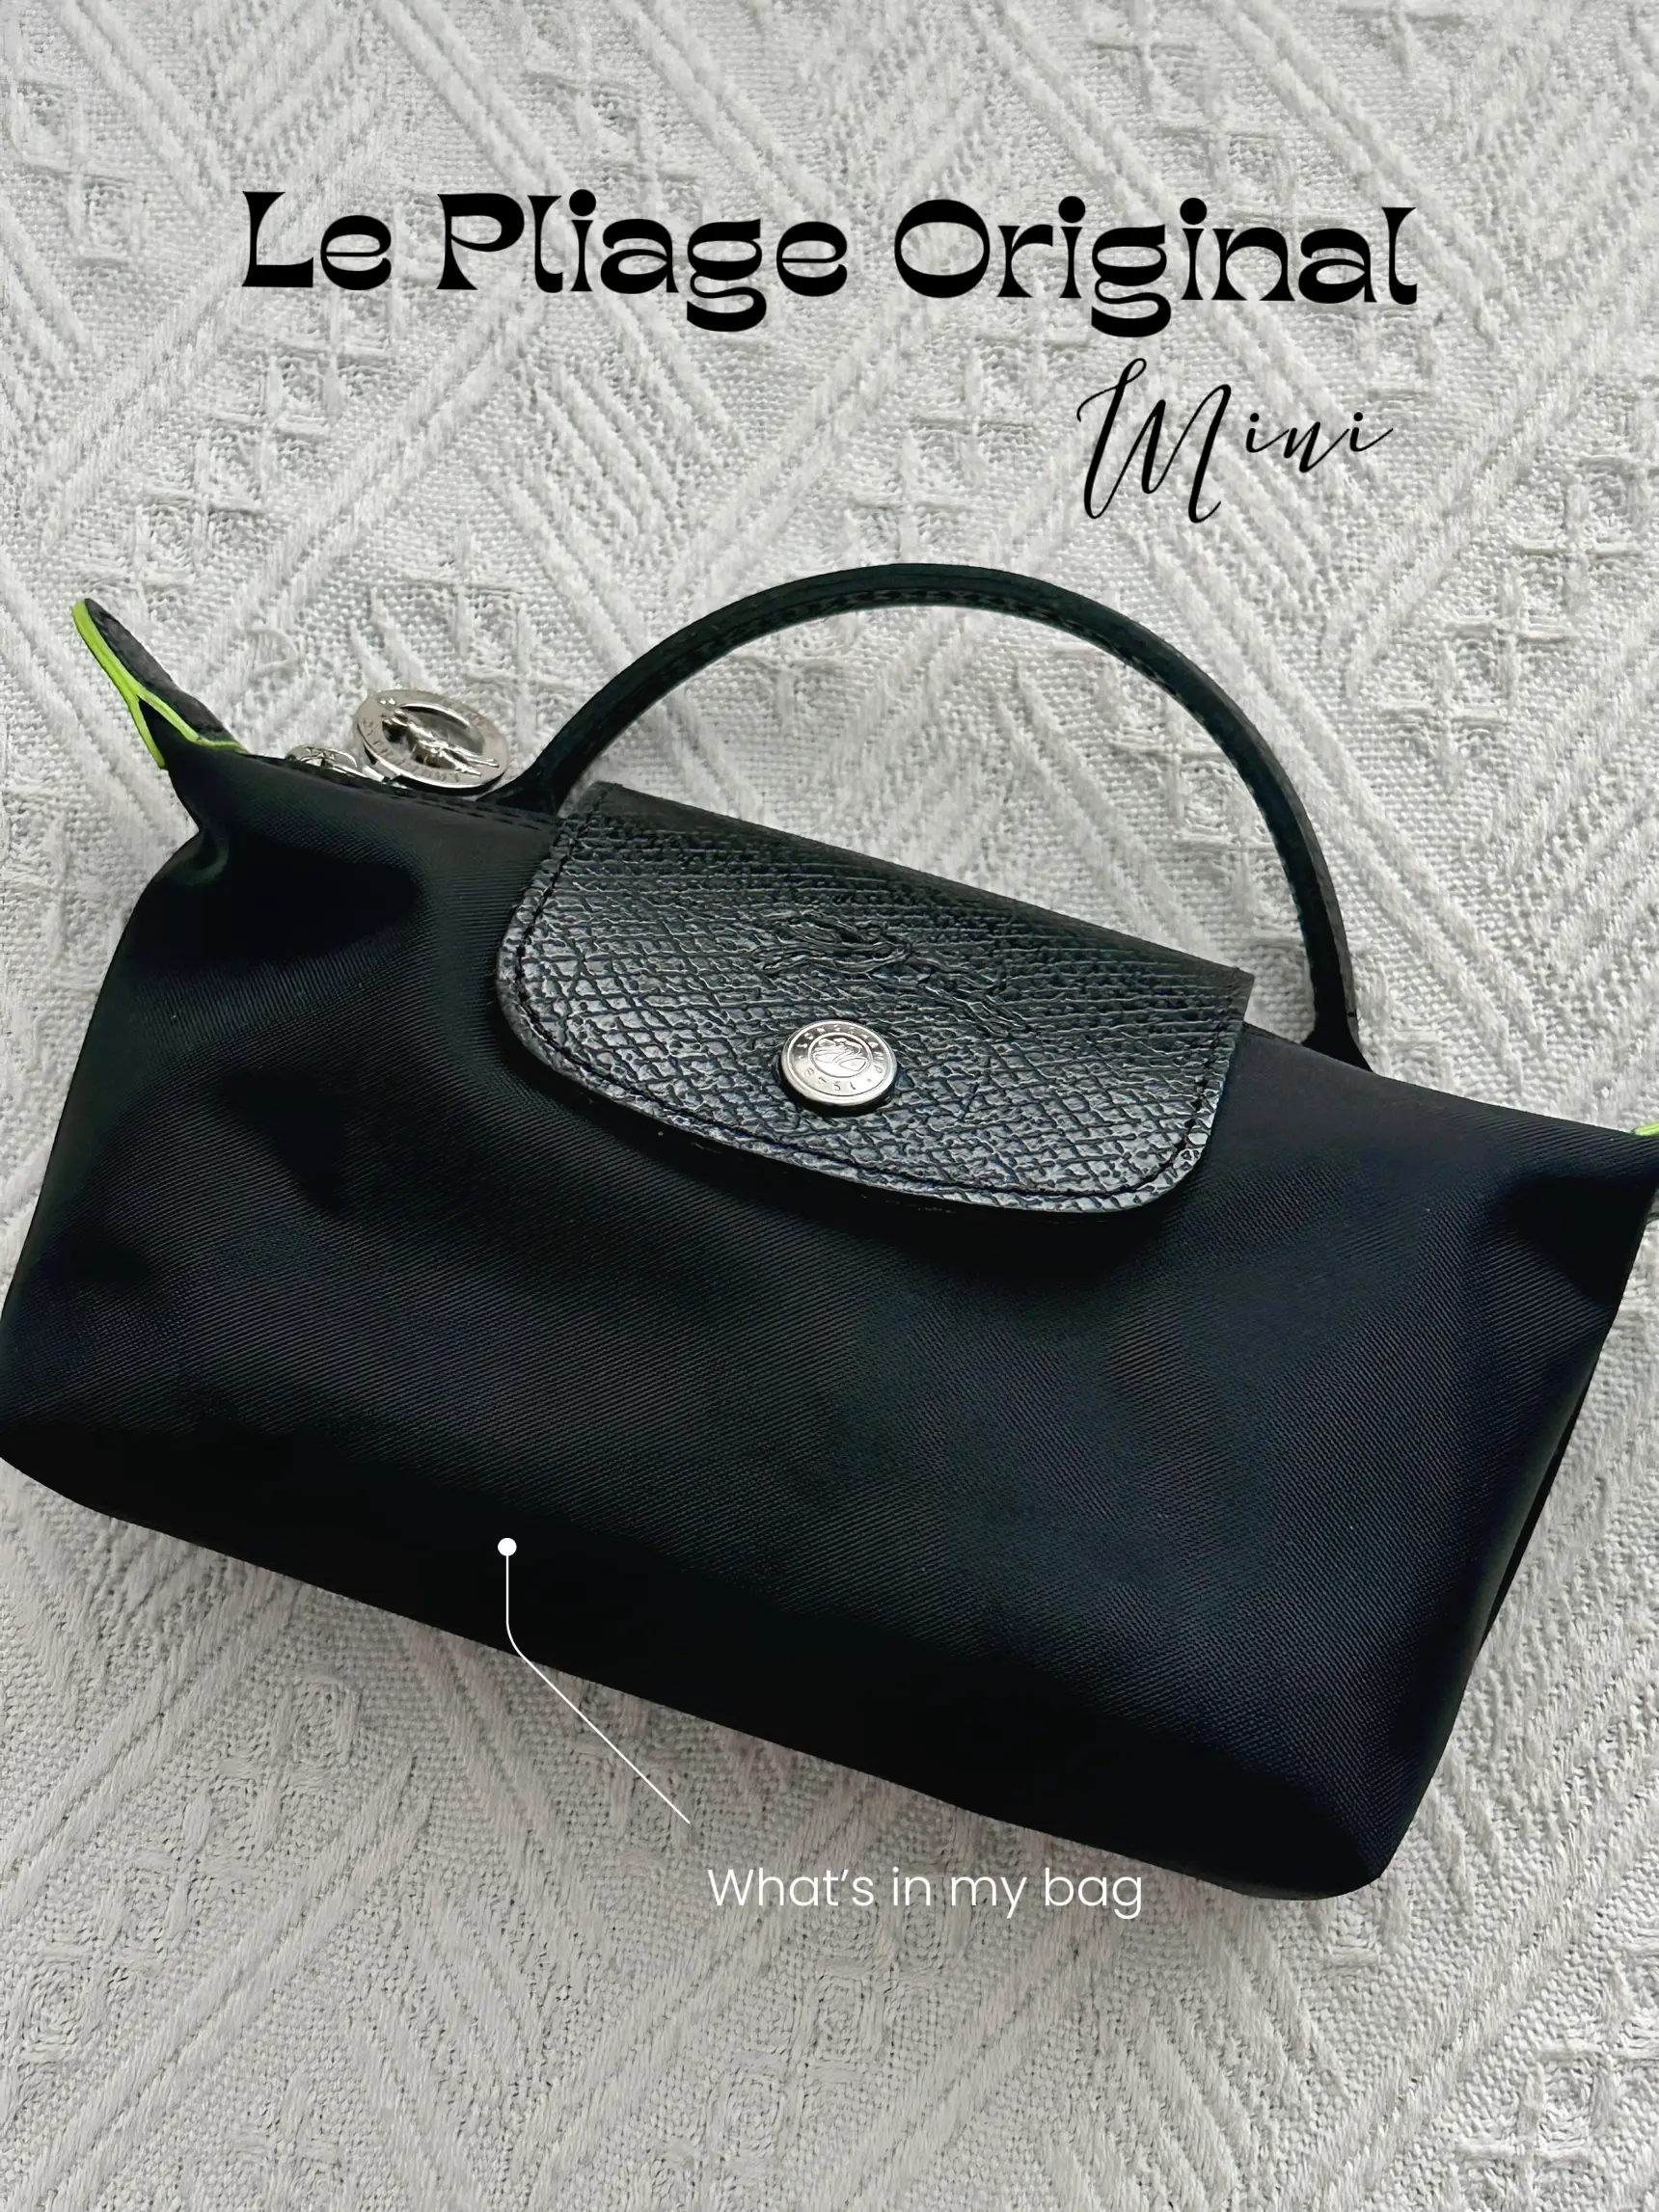 Longchamps Le Pliage Pouch is going viral on TikTok right now